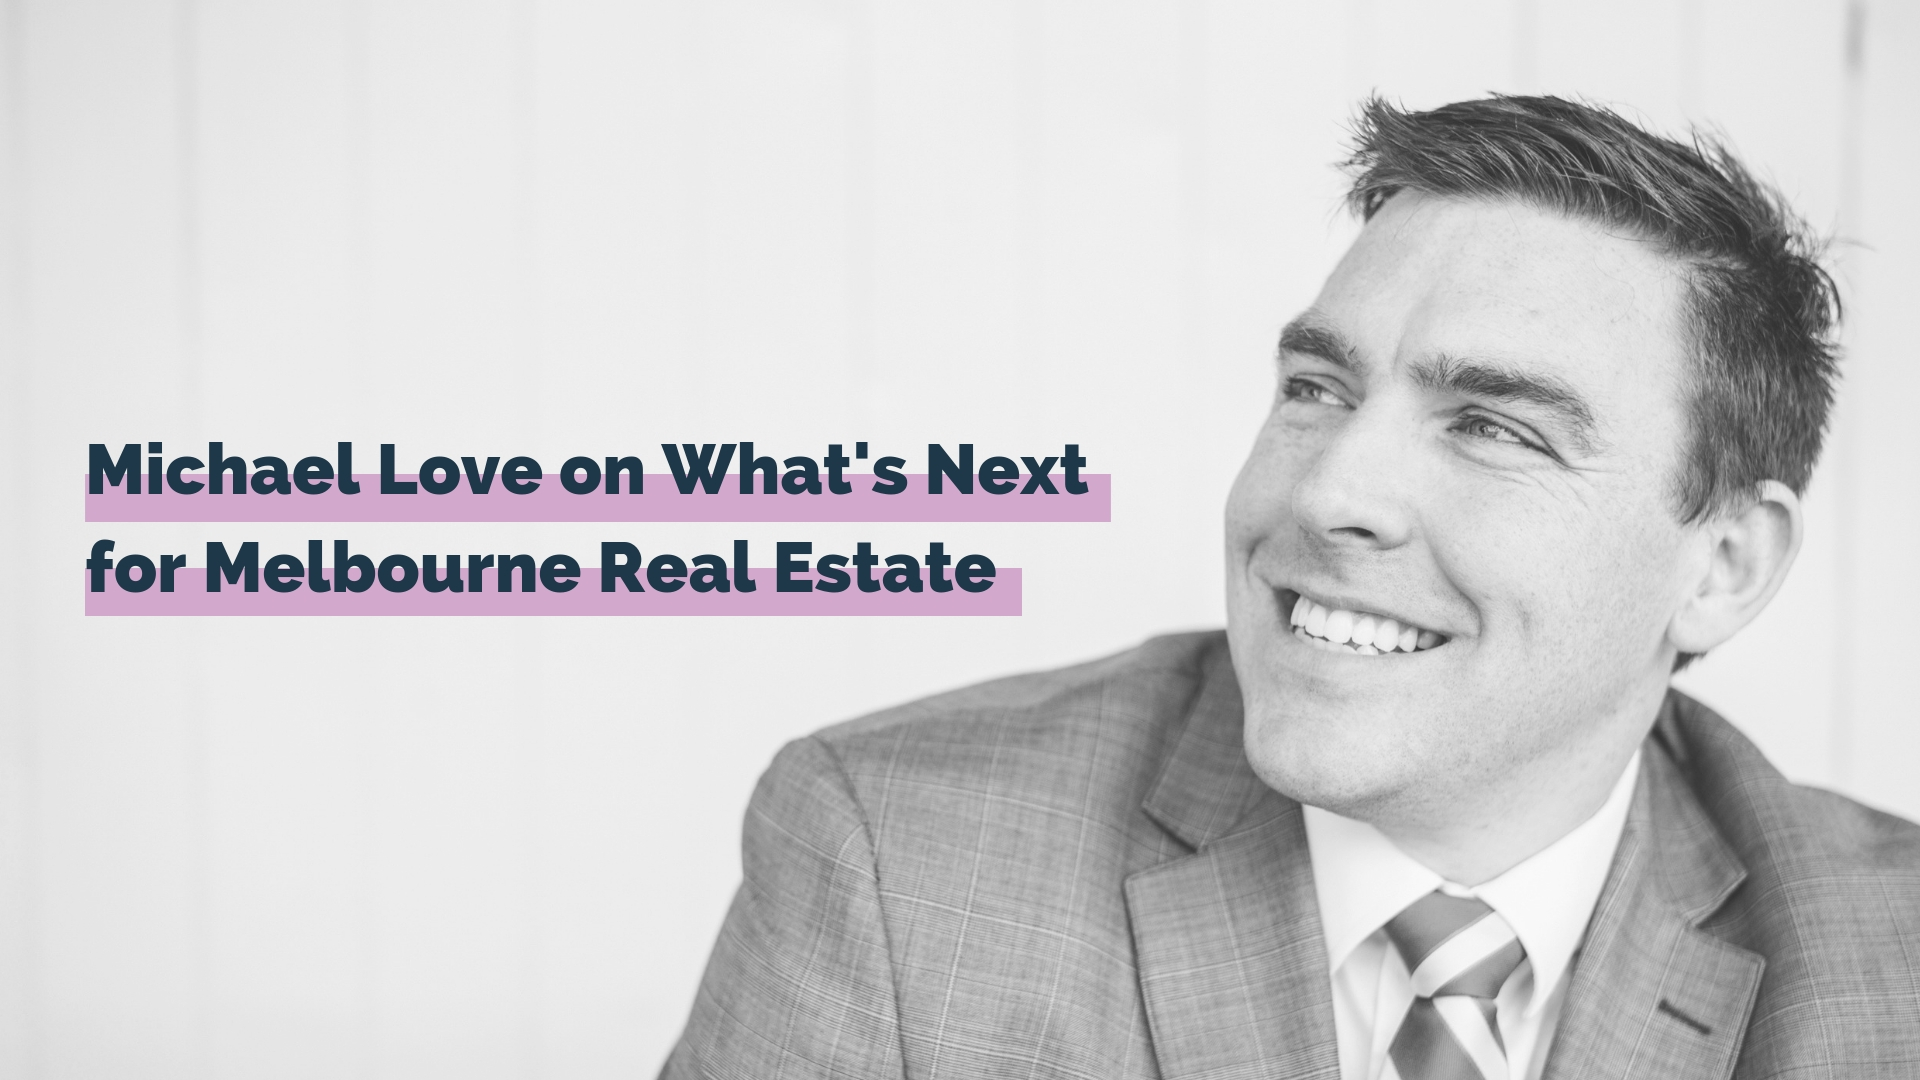 Michael Love on What's Next for Melbourne Real Estate